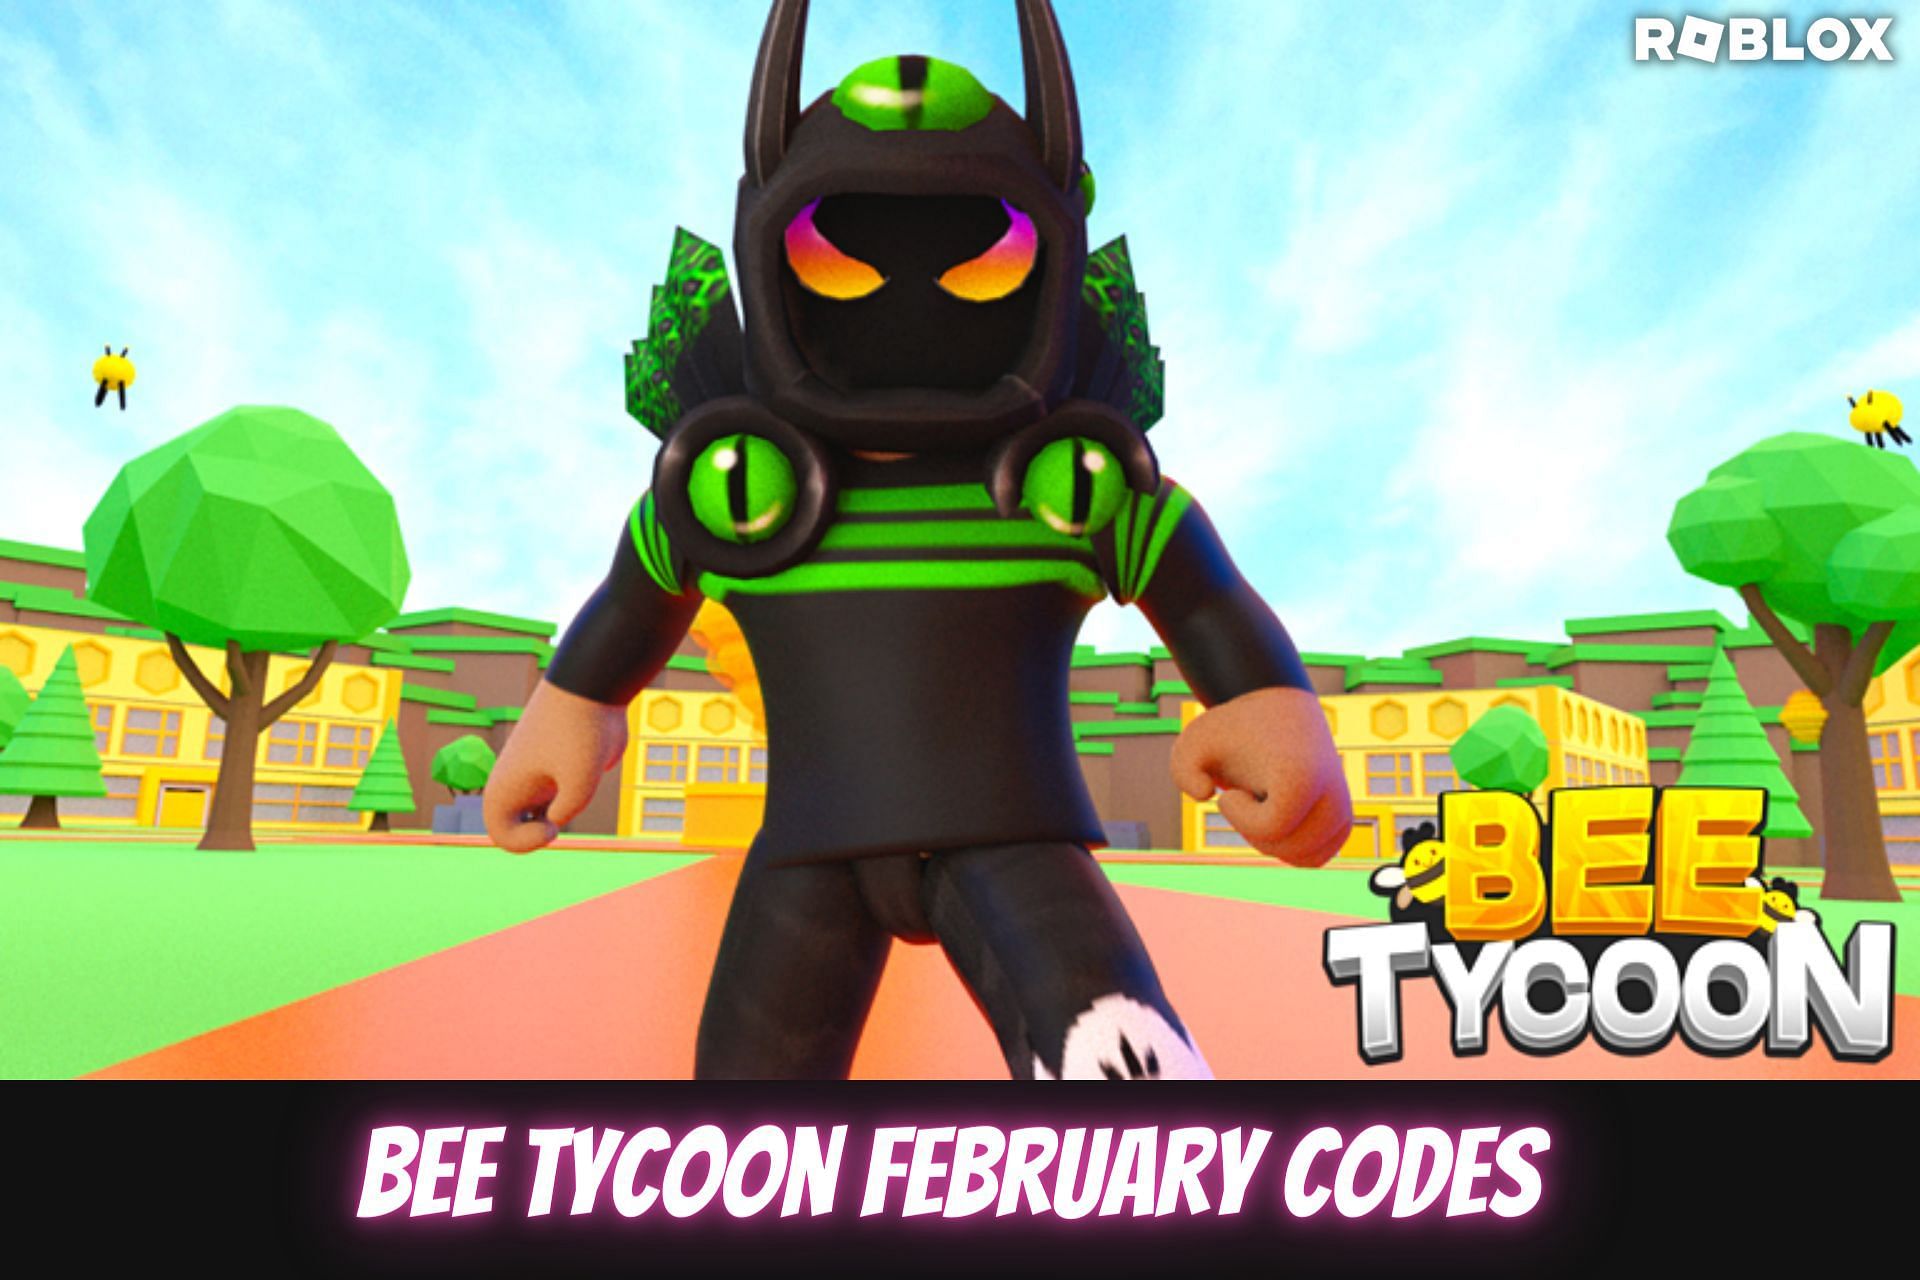  Roblox Bee Tycoon February codes